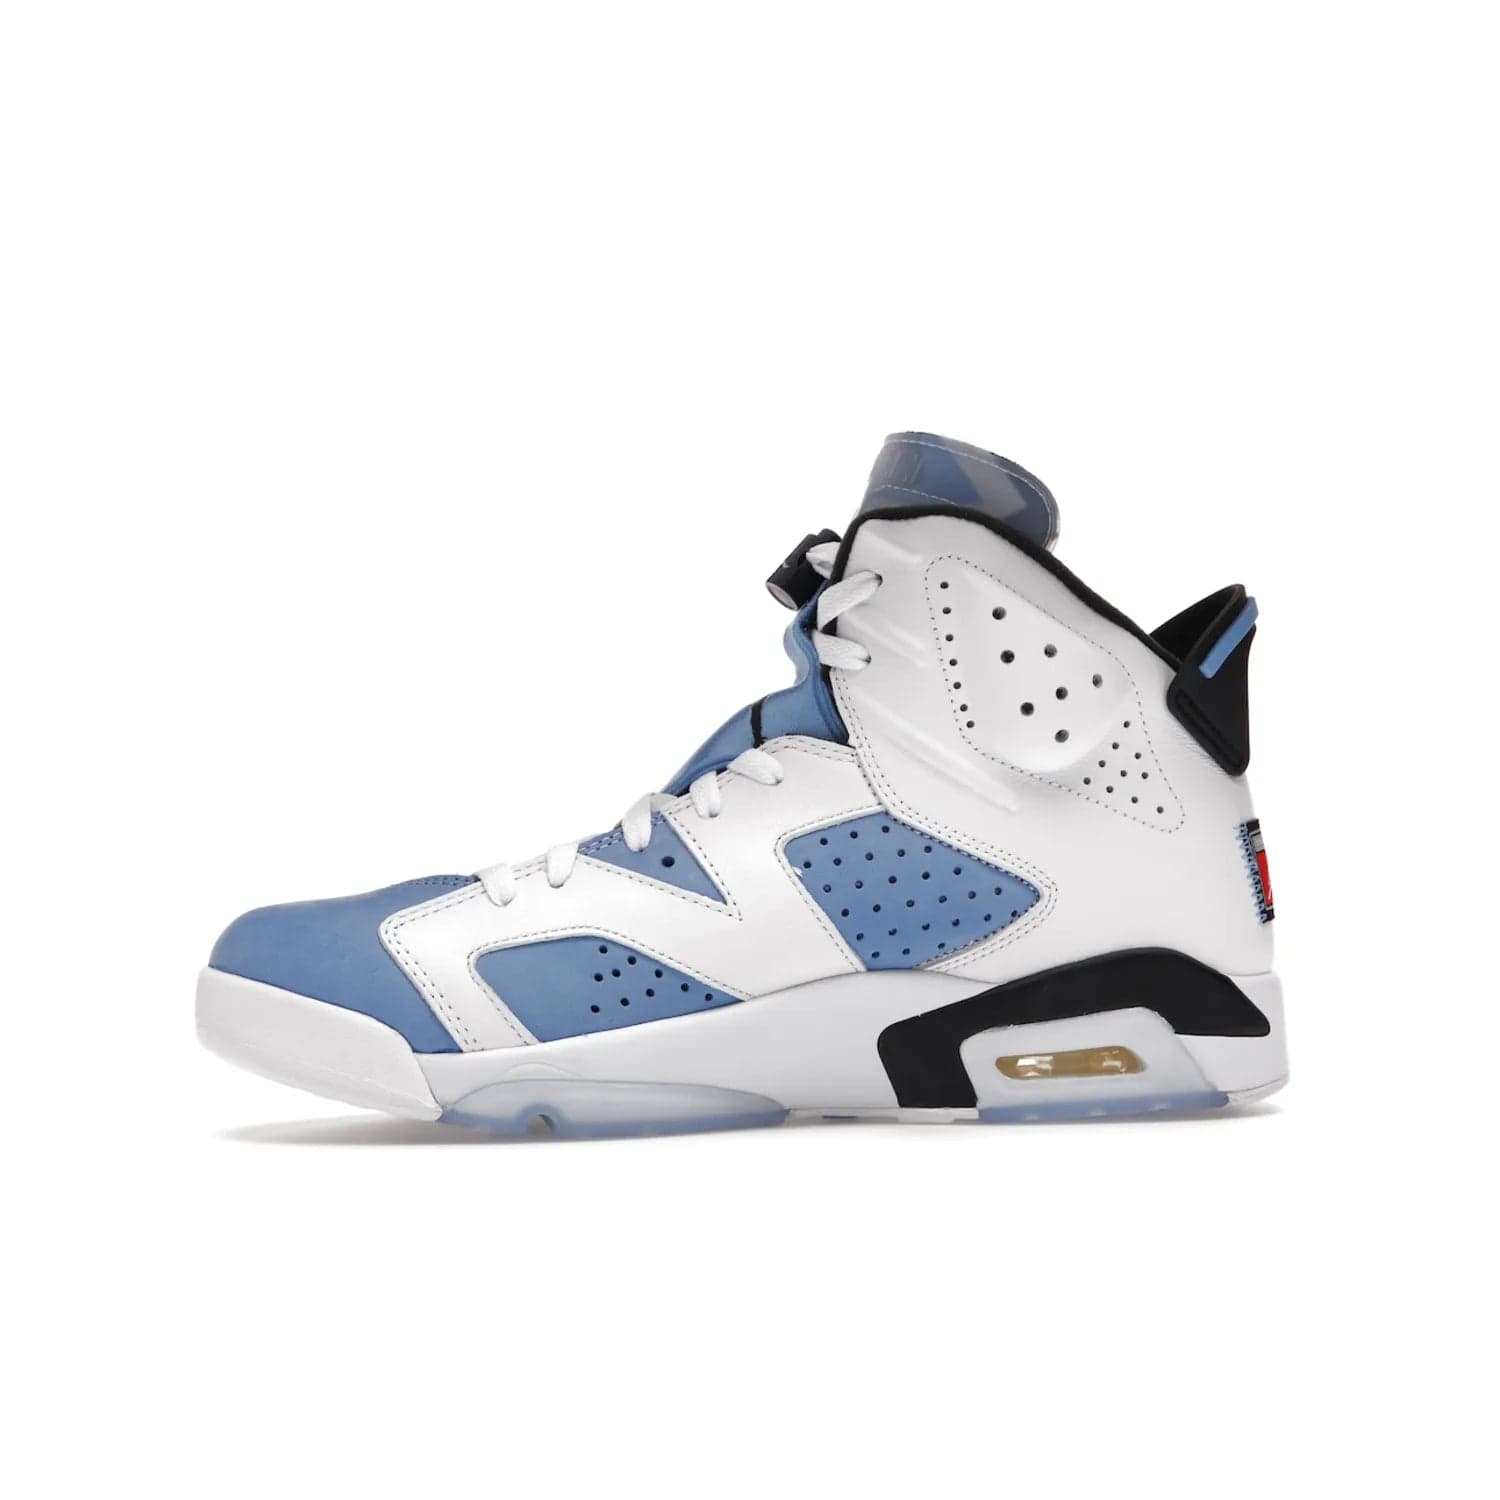 Jordan 6 Retro UNC White - Image 18 - Only at www.BallersClubKickz.com - Air Jordan 6 Retro UNC White with classic UNC colors brings nostalgia and style to a legendary silhouette. Celebrate MJ's alma mater with navy blue accents, icy semi-translucent sole and Jordan Team patch. Out March 2022 for the Sneaker Enthusiast.